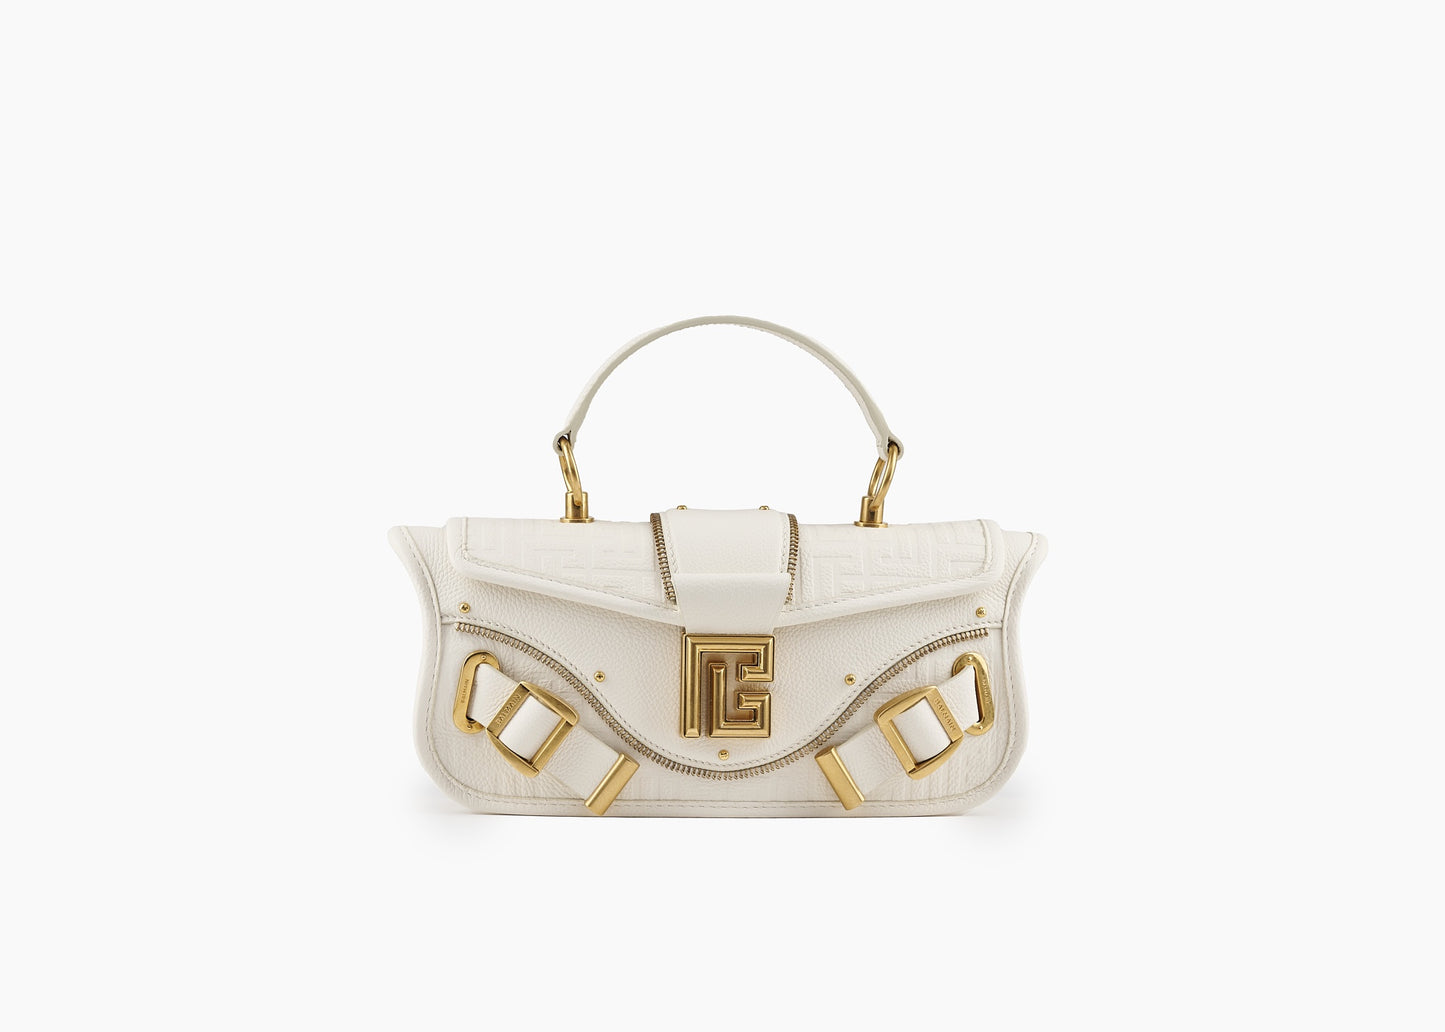 SALE Blaze Pouch Clutch Bag Grained Leather Off White was $3395